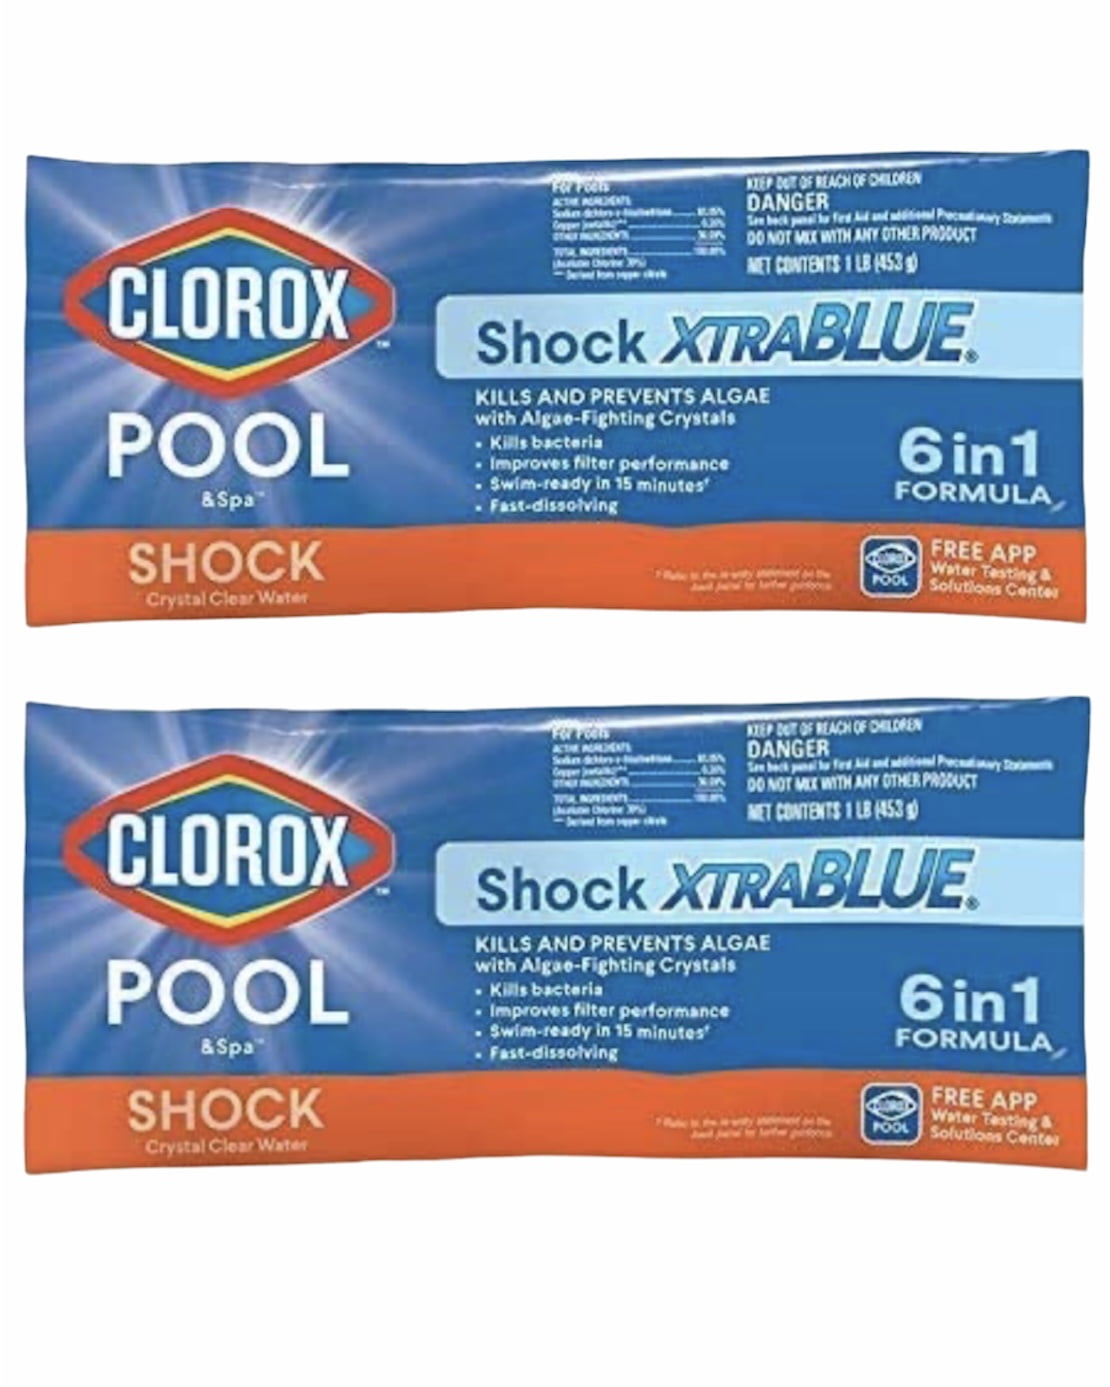 Clorox Pool & Spa Shock Xtra Blue 6 in 1 formula 6 Pack Sealed Box Ship Now 